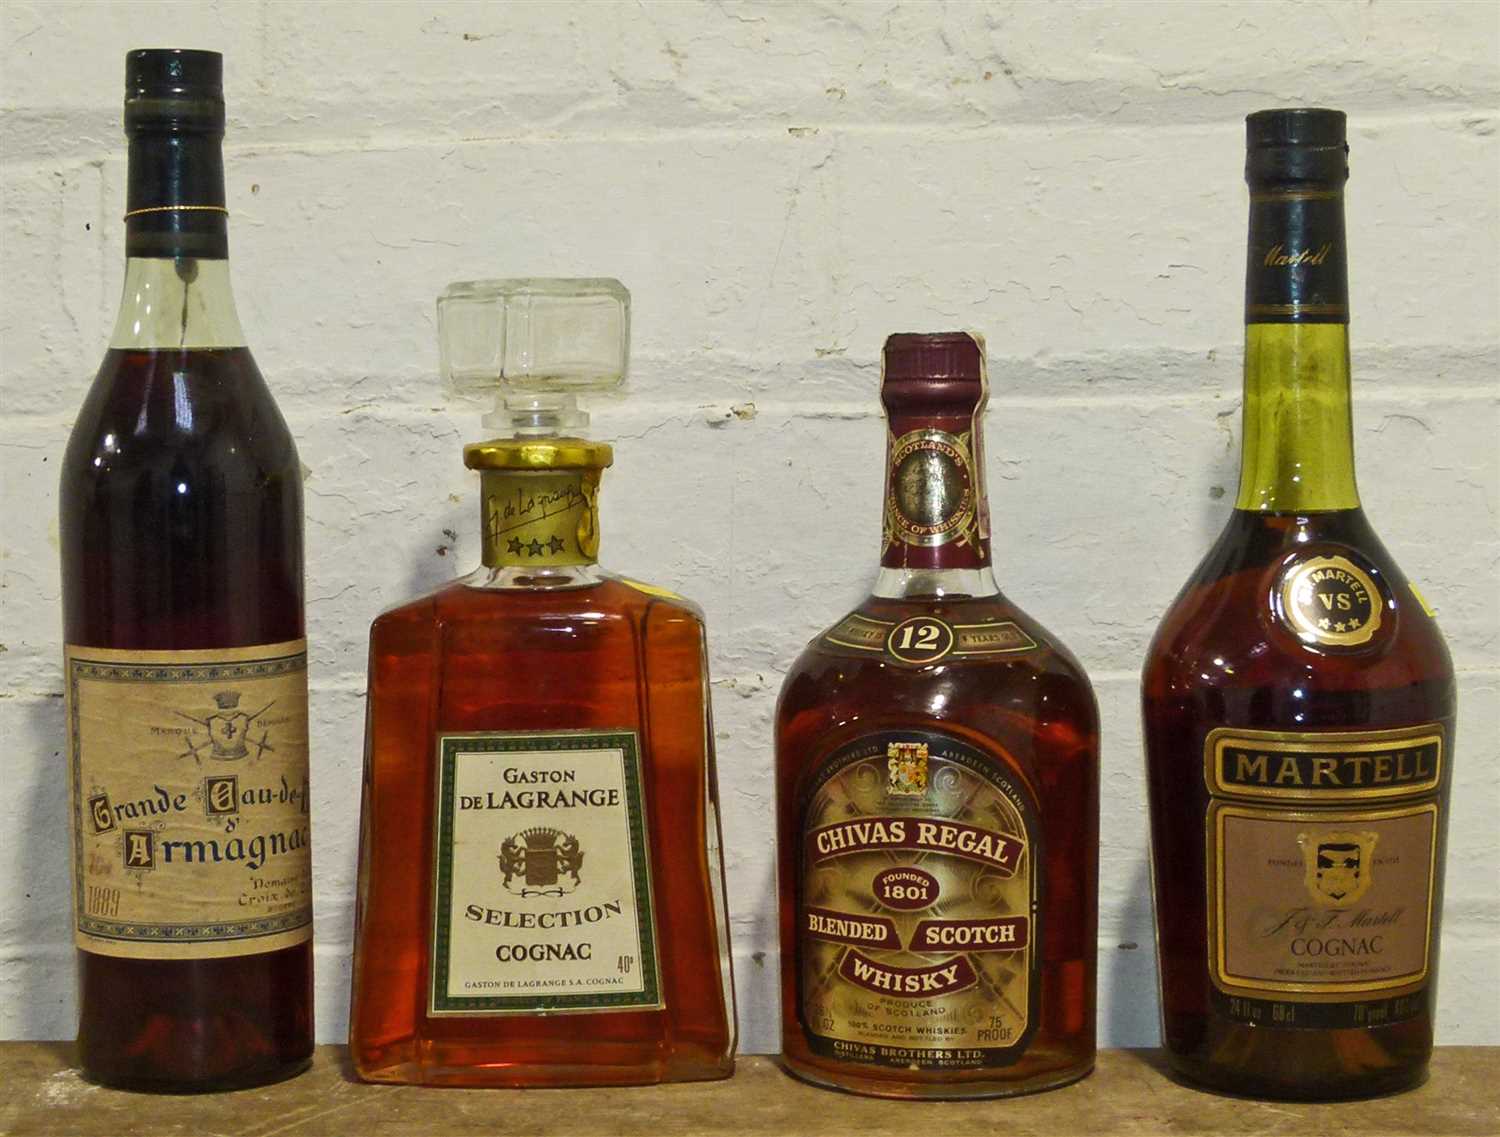 Lot 66 - 4 Bottles Mixed Lot Armagnac, Cognac and Whisky to include 1889 Vintage Armagnac